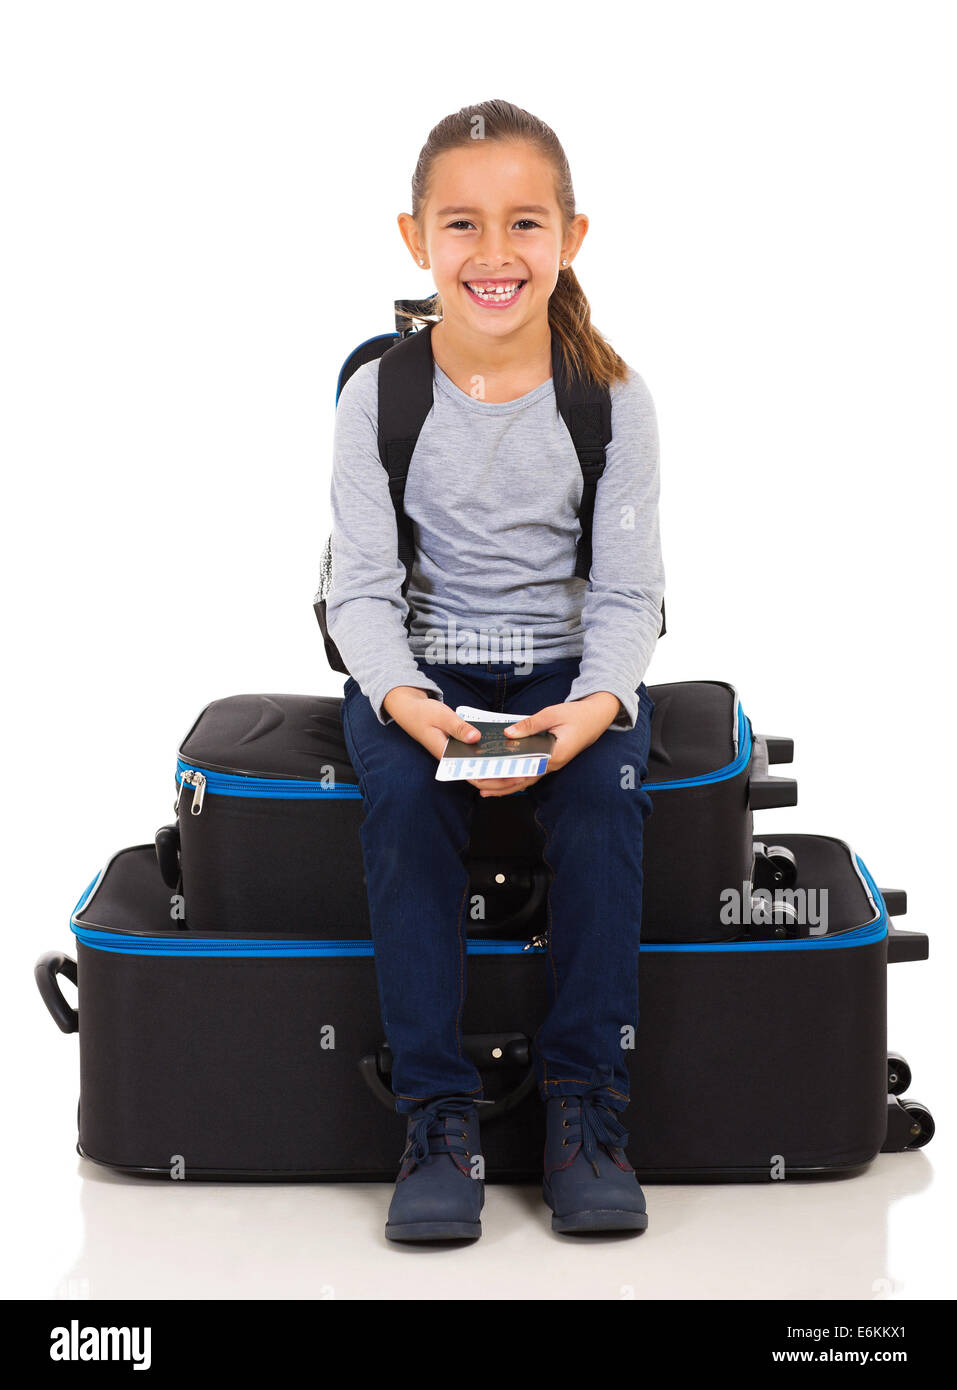 happy little girl sitting on luggage bags and holding boarding pass with passport Stock Photo